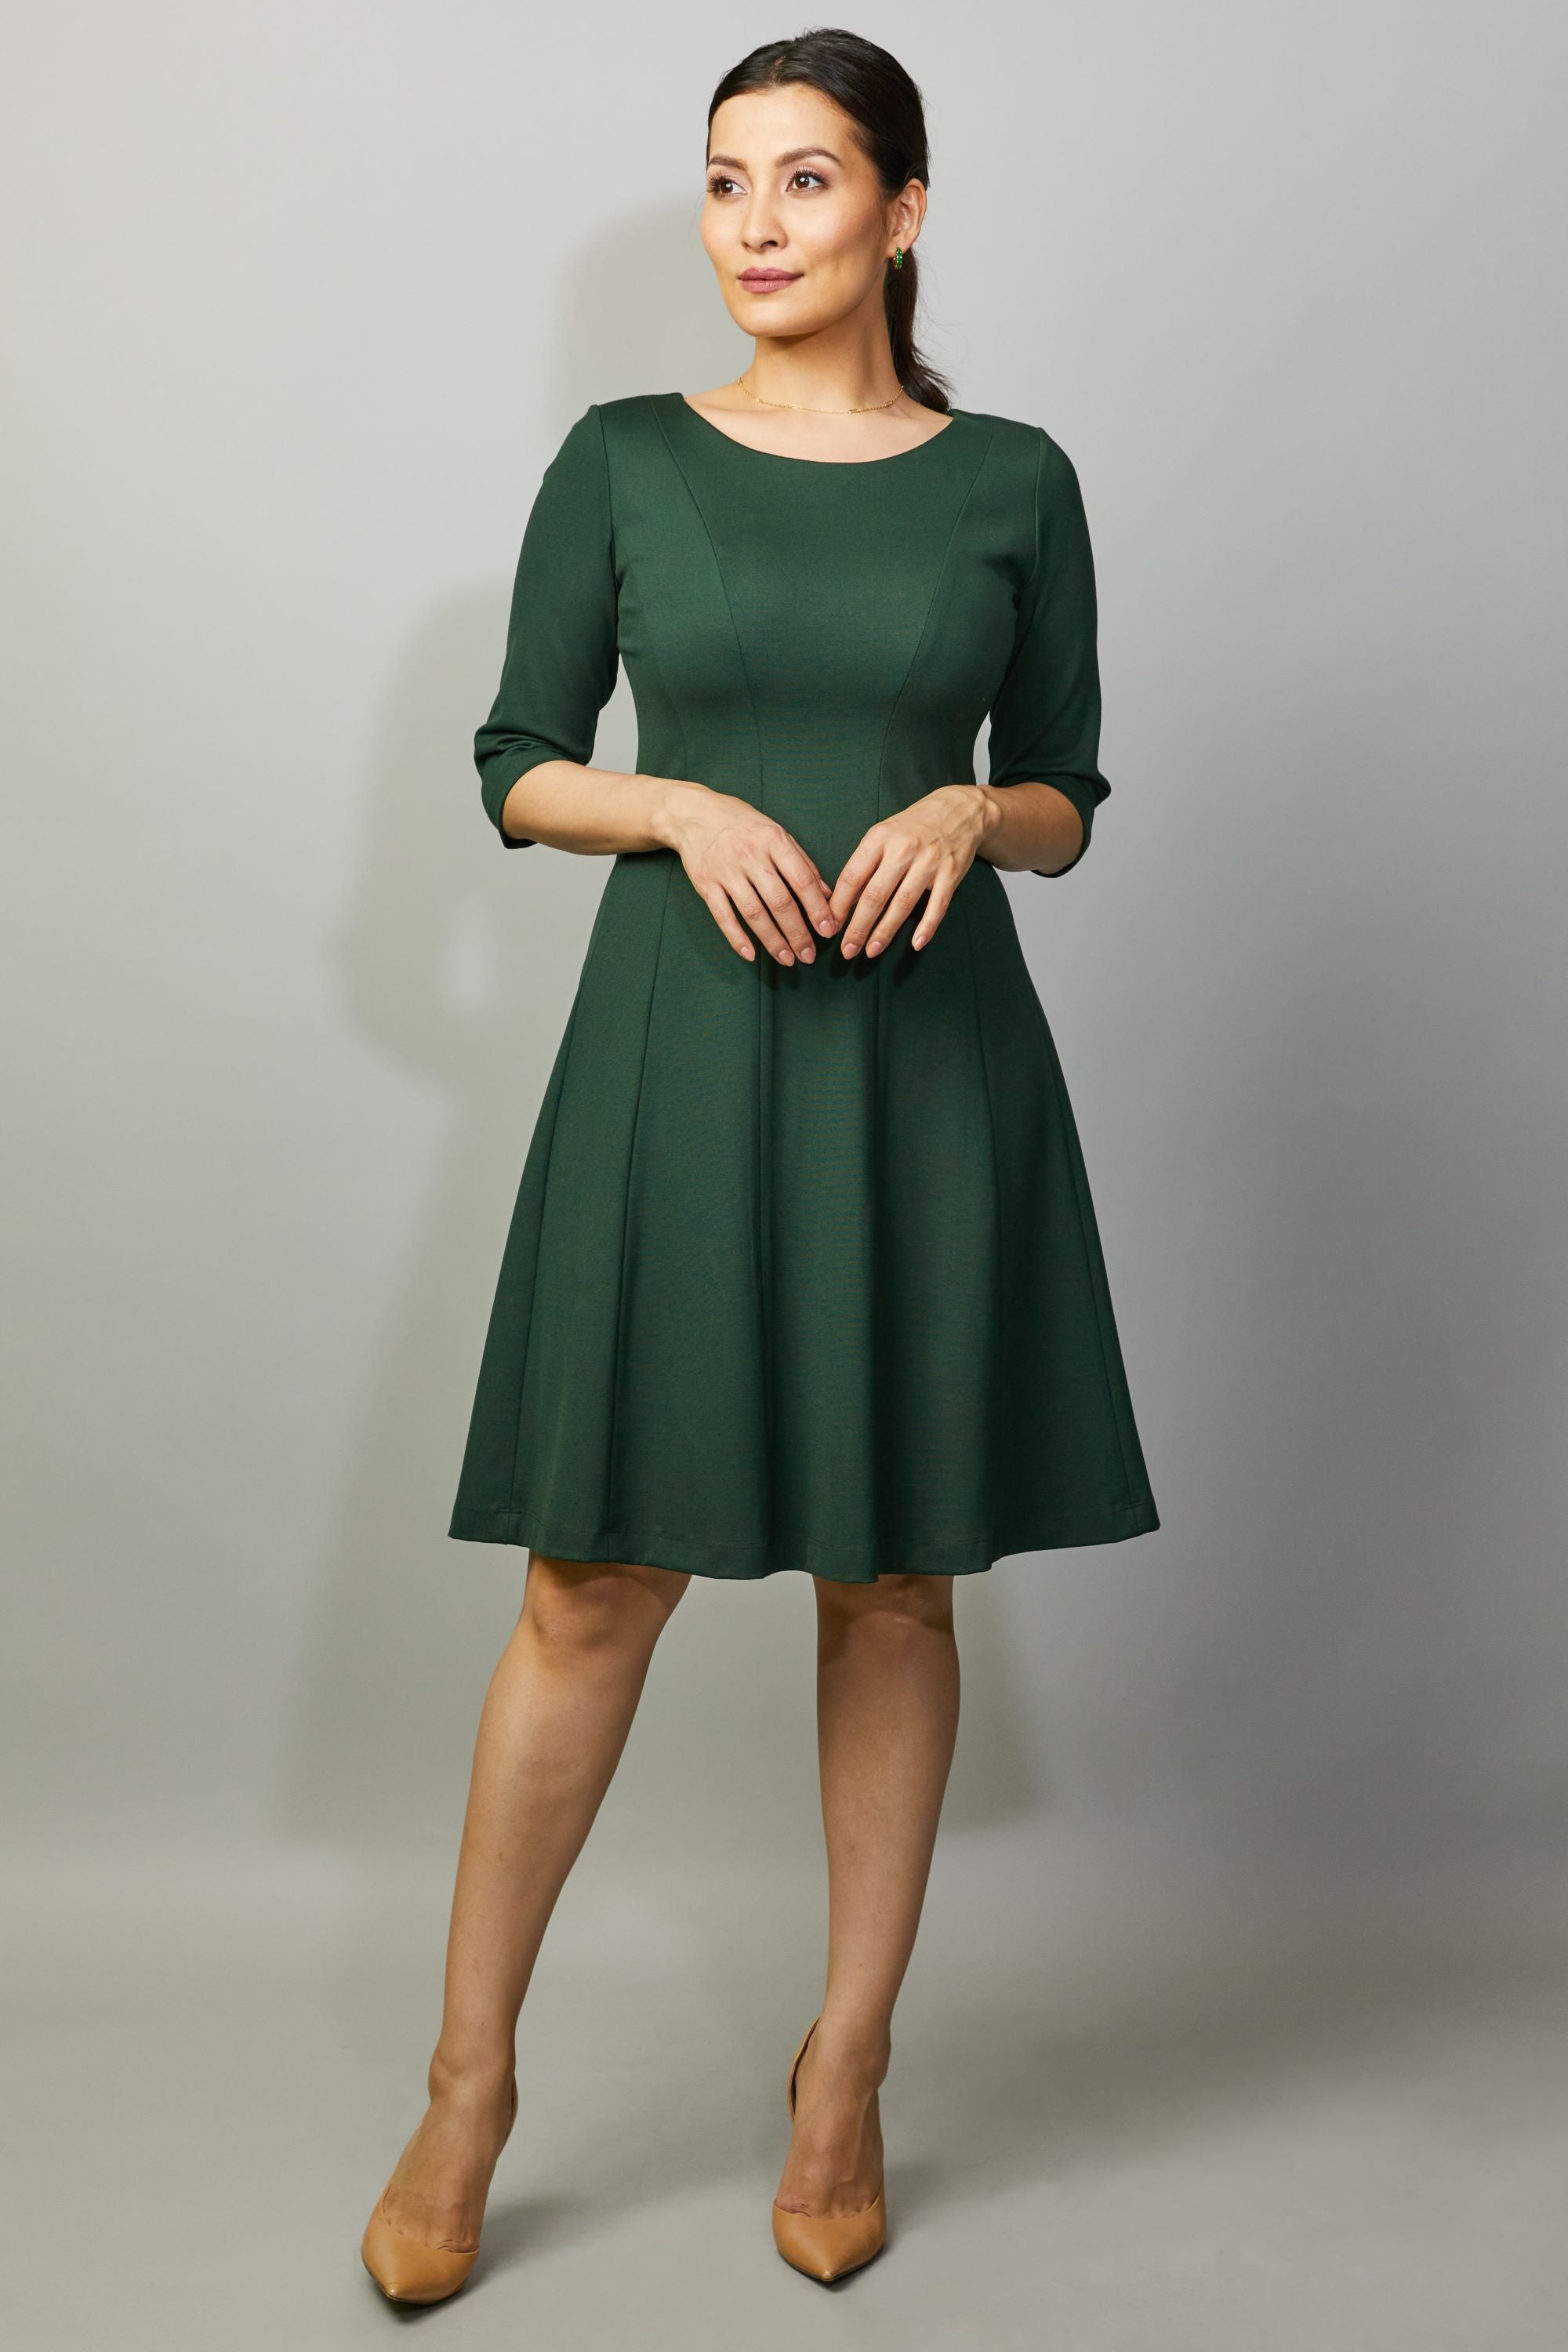 Women' Business Lizzie Dress - Forest Green NORA GARDNER | OFFICIAL STORE for work and office